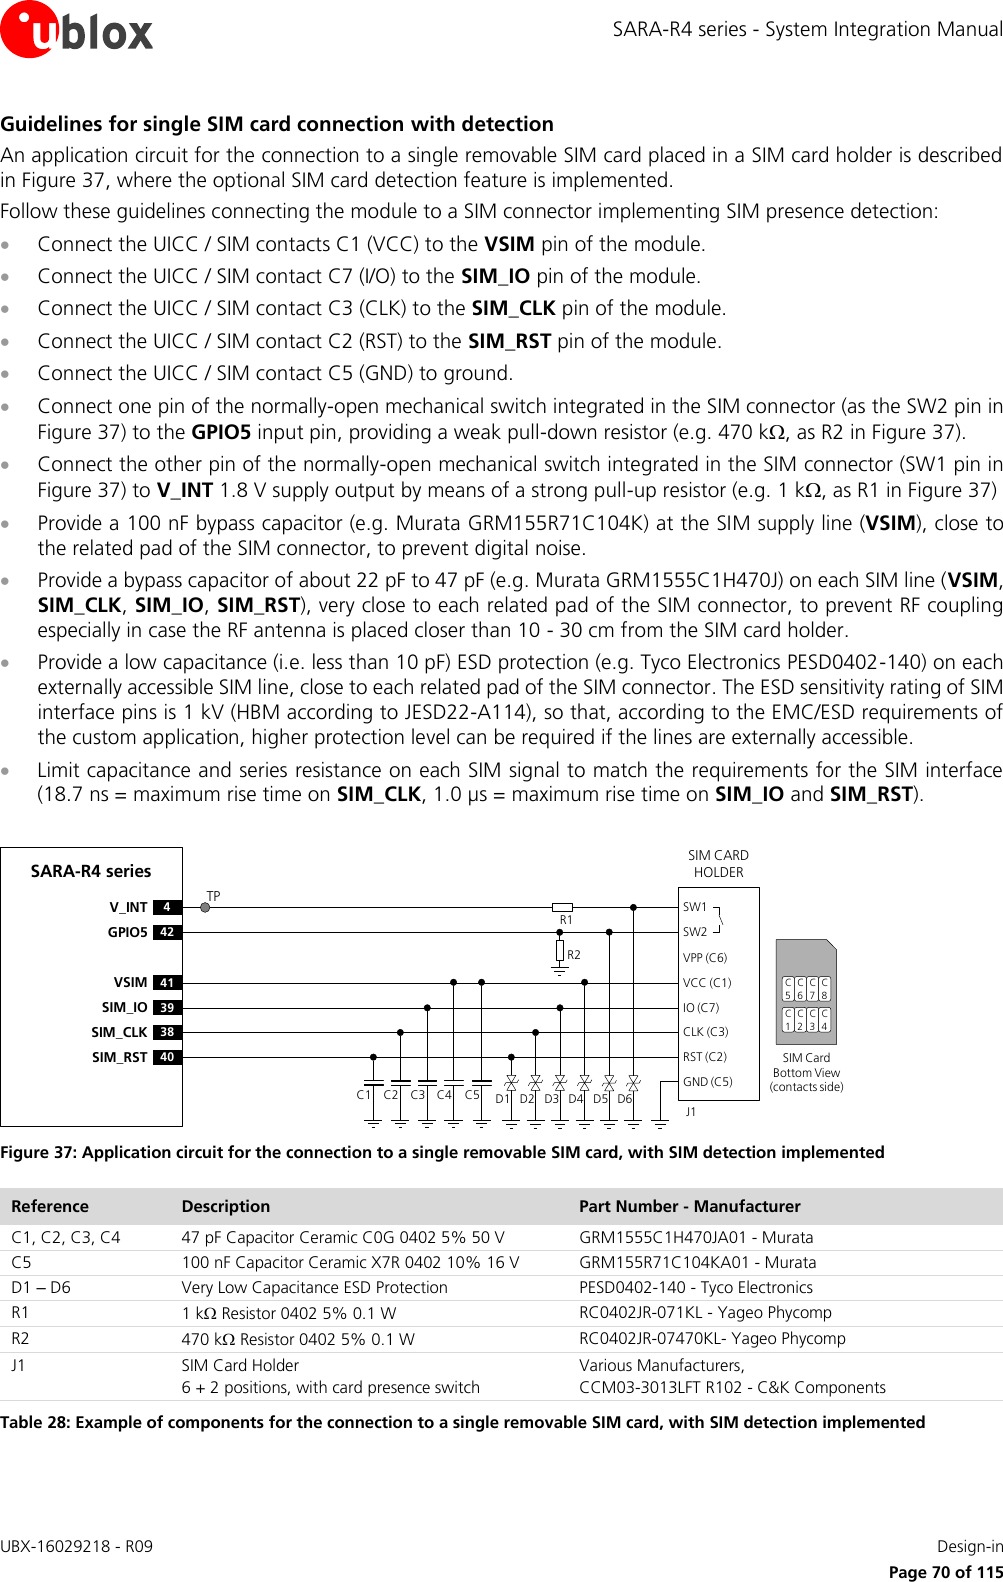 SARA-R4 series - System Integration Manual UBX-16029218 - R09    Design-in     Page 70 of 115 Guidelines for single SIM card connection with detection An application circuit for the connection to a single removable SIM card placed in a SIM card holder is described in Figure 37, where the optional SIM card detection feature is implemented. Follow these guidelines connecting the module to a SIM connector implementing SIM presence detection:  Connect the UICC / SIM contacts C1 (VCC) to the VSIM pin of the module.  Connect the UICC / SIM contact C7 (I/O) to the SIM_IO pin of the module.  Connect the UICC / SIM contact C3 (CLK) to the SIM_CLK pin of the module.  Connect the UICC / SIM contact C2 (RST) to the SIM_RST pin of the module.  Connect the UICC / SIM contact C5 (GND) to ground.  Connect one pin of the normally-open mechanical switch integrated in the SIM connector (as the SW2 pin in Figure 37) to the GPIO5 input pin, providing a weak pull-down resistor (e.g. 470 k, as R2 in Figure 37).  Connect the other pin of the normally-open mechanical switch integrated in the SIM connector (SW1 pin in Figure 37) to V_INT 1.8 V supply output by means of a strong pull-up resistor (e.g. 1 k, as R1 in Figure 37)  Provide a 100 nF bypass capacitor (e.g. Murata GRM155R71C104K) at the SIM supply line (VSIM), close to the related pad of the SIM connector, to prevent digital noise.   Provide a bypass capacitor of about 22 pF to 47 pF (e.g. Murata GRM1555C1H470J) on each SIM line (VSIM, SIM_CLK, SIM_IO, SIM_RST), very close to each related pad of the SIM connector, to prevent RF coupling especially in case the RF antenna is placed closer than 10 - 30 cm from the SIM card holder.  Provide a low capacitance (i.e. less than 10 pF) ESD protection (e.g. Tyco Electronics PESD0402-140) on each externally accessible SIM line, close to each related pad of the SIM connector. The ESD sensitivity rating of SIM interface pins is 1 kV (HBM according to JESD22-A114), so that, according to the EMC/ESD requirements of the custom application, higher protection level can be required if the lines are externally accessible.   Limit capacitance and series resistance on each SIM signal to match the requirements for the SIM interface (18.7 ns = maximum rise time on SIM_CLK, 1.0 µs = maximum rise time on SIM_IO and SIM_RST).  SARA-R4 series41VSIM39SIM_IO38SIM_CLK40SIM_RST4V_INT42GPIO5SIM CARD HOLDERC5C6C7C1C2C3SIM Card Bottom View (contacts side)C1VPP (C6)VCC (C1)IO (C7)CLK (C3)RST (C2)GND (C5)C2 C3 C5J1C4SW1SW2D1 D2 D3 D4 D5 D6R2R1C8C4TP Figure 37: Application circuit for the connection to a single removable SIM card, with SIM detection implemented Reference Description Part Number - Manufacturer C1, C2, C3, C4 47 pF Capacitor Ceramic C0G 0402 5% 50 V GRM1555C1H470JA01 - Murata C5 100 nF Capacitor Ceramic X7R 0402 10% 16 V GRM155R71C104KA01 - Murata D1 – D6 Very Low Capacitance ESD Protection PESD0402-140 - Tyco Electronics  R1 1 k Resistor 0402 5% 0.1 W RC0402JR-071KL - Yageo Phycomp R2 470 k Resistor 0402 5% 0.1 W RC0402JR-07470KL- Yageo Phycomp J1 SIM Card Holder 6 + 2 positions, with card presence switch Various Manufacturers, CCM03-3013LFT R102 - C&amp;K Components Table 28: Example of components for the connection to a single removable SIM card, with SIM detection implemented  